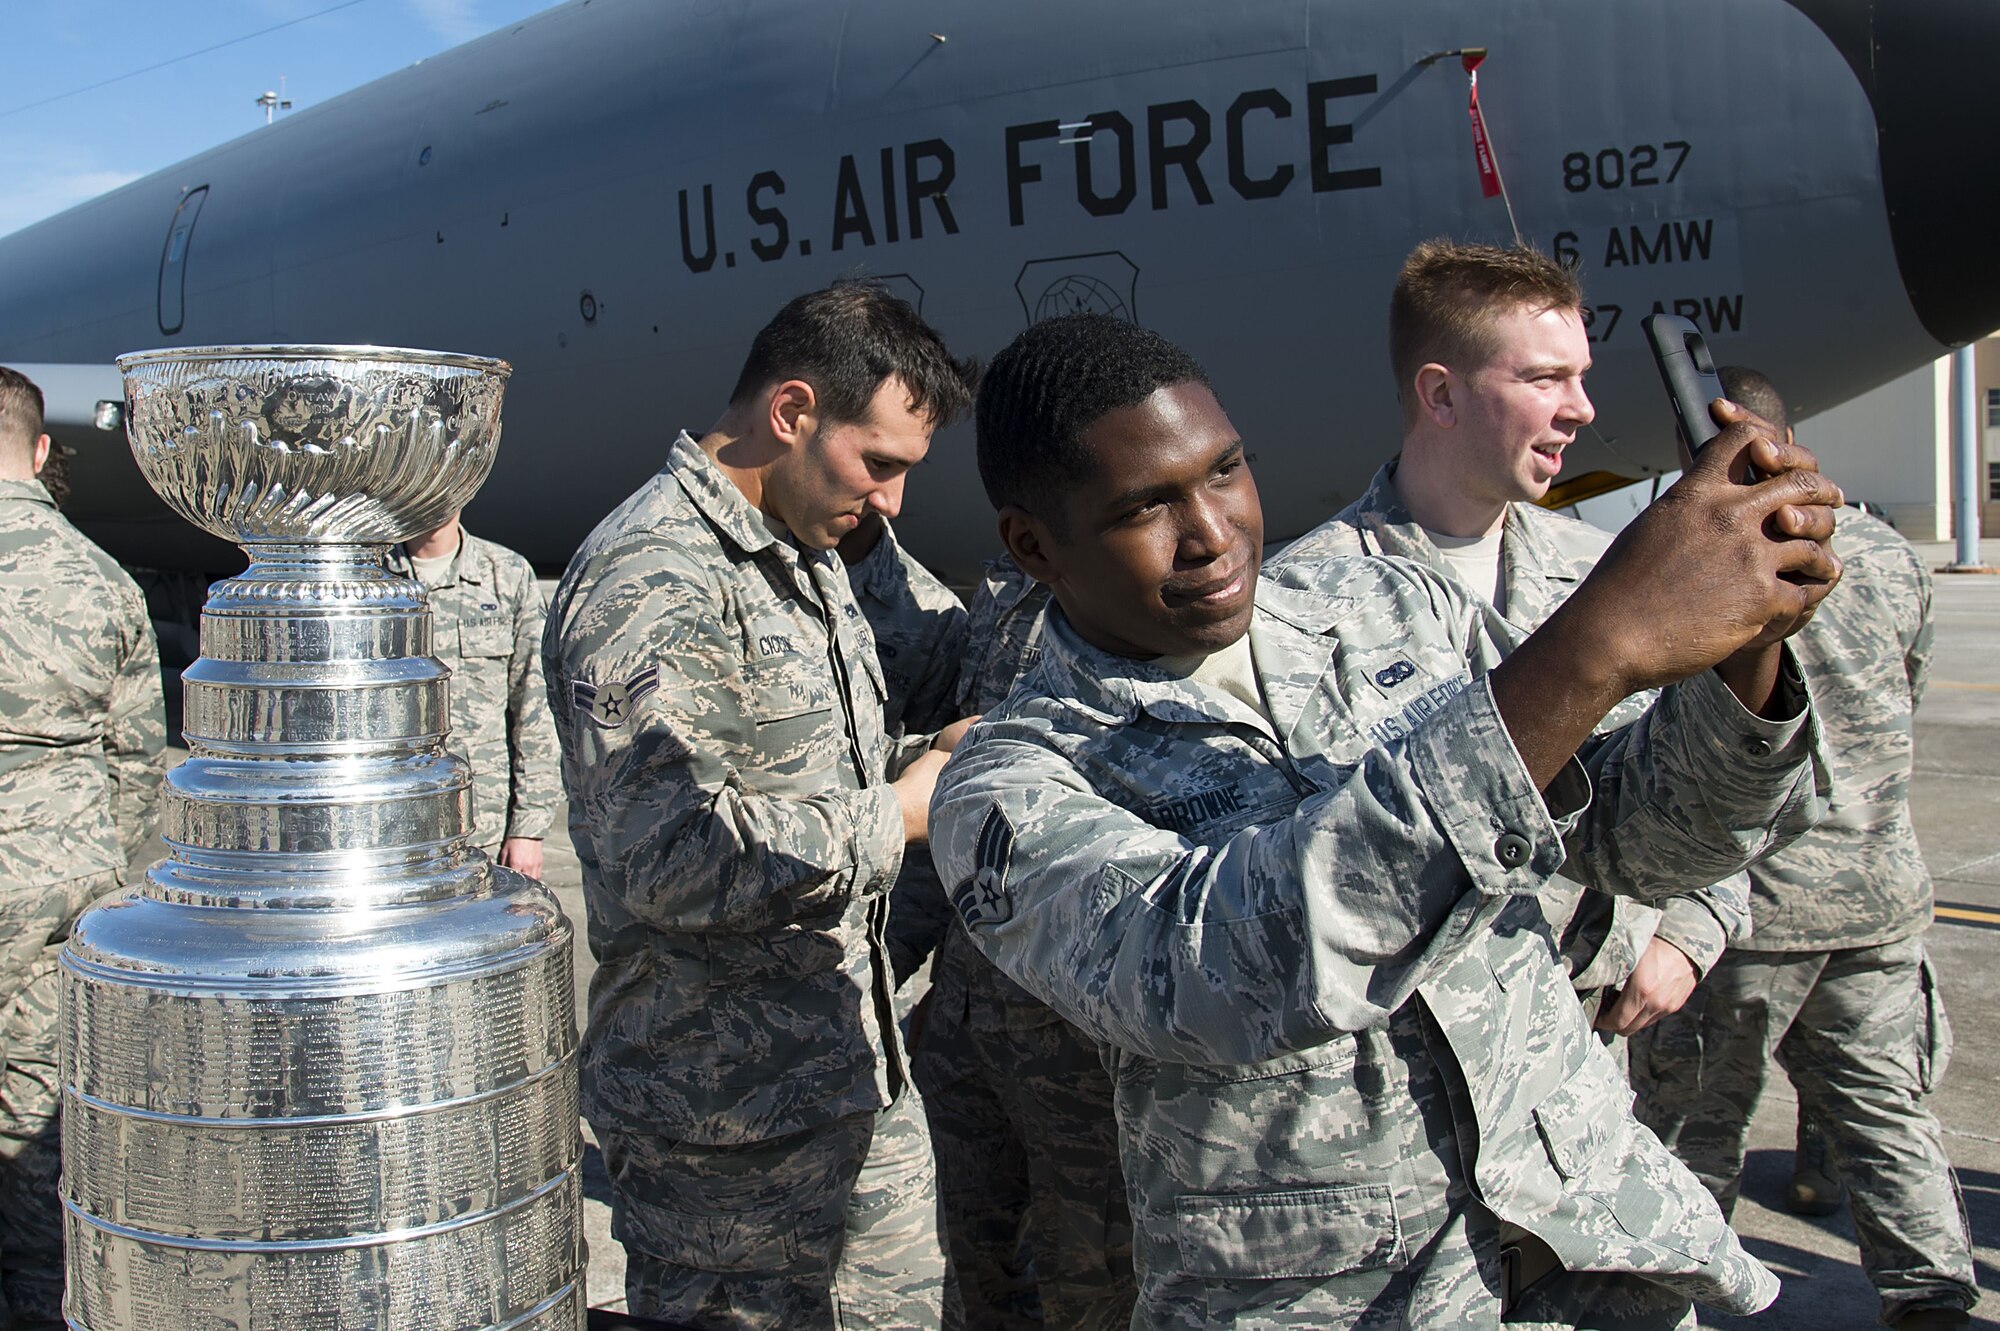 U.S. Air Force Senior Airman Justin Browne, an electrical and environmental systems journeyman assigned to the 6th Maintenance Squadron, takes a photo with the Stanley Cup at MacDill Air Force Base, Fla., Jan. 24, 2018. The Stanley Cup is the oldest trophy competed for by professional athletes, making it a fan favorite for photos.